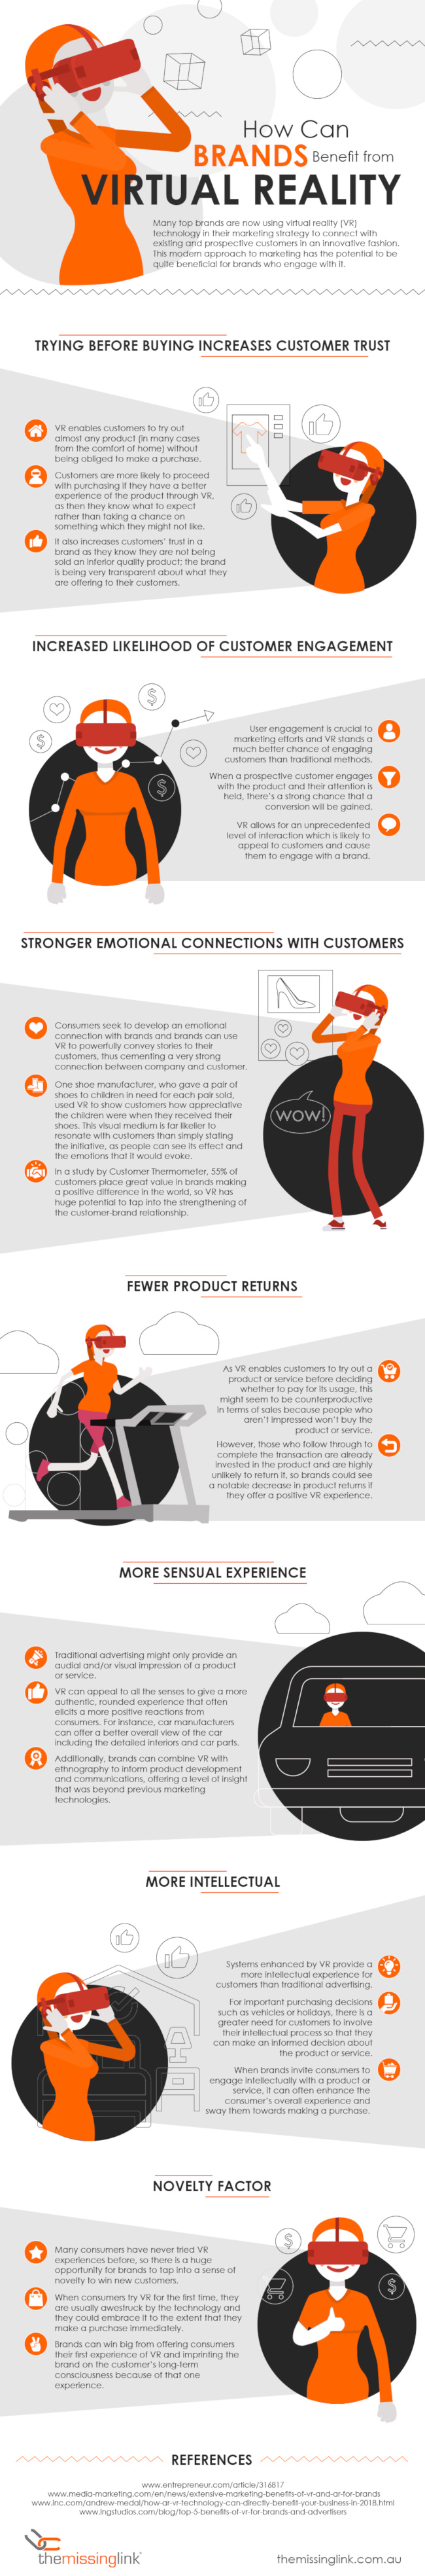 7 Ways Brands Can Benefit from Virtual Reality? [Infographic]